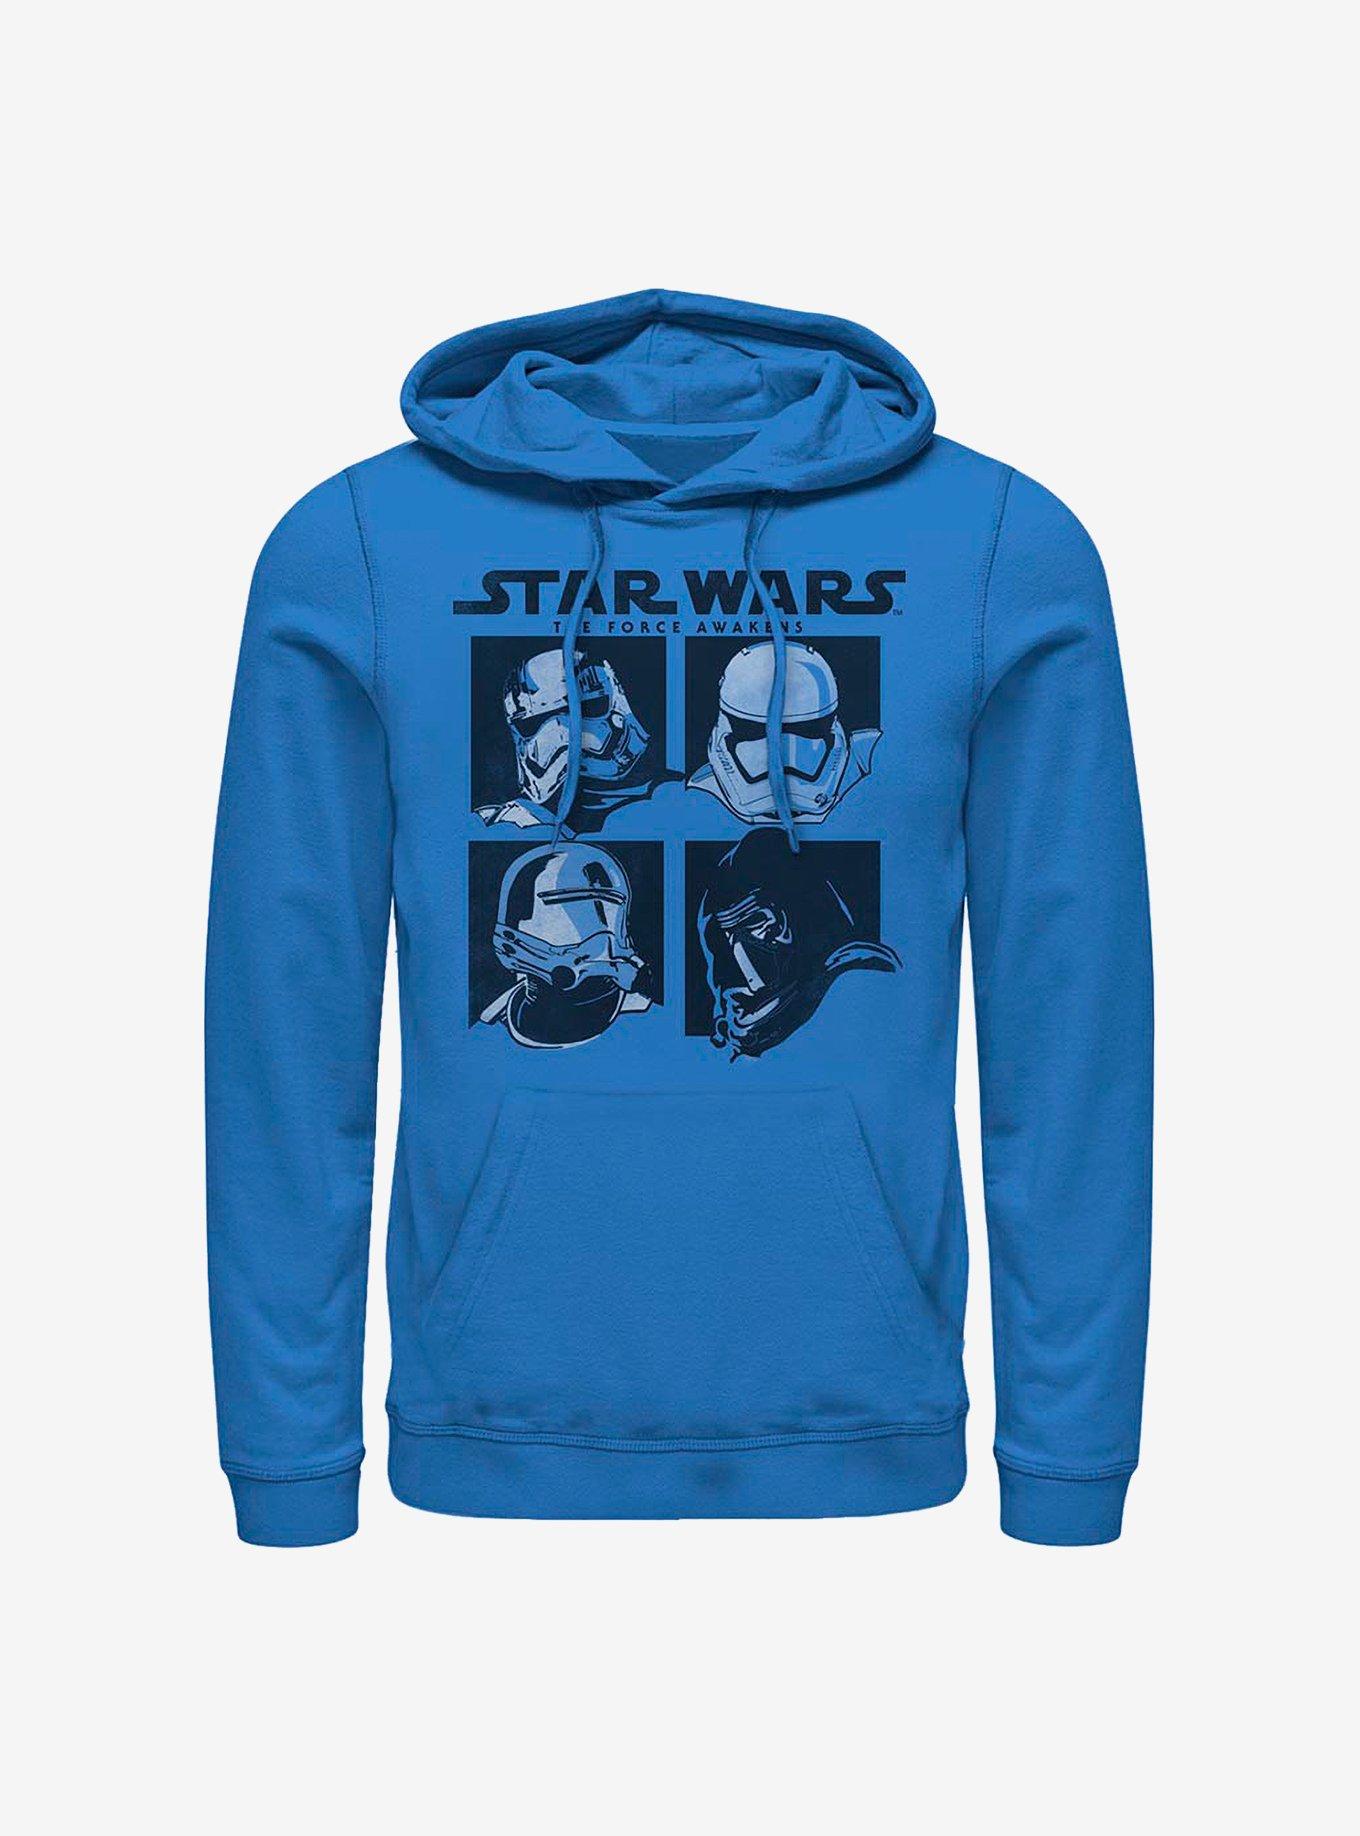 Star Wars: The Force Awakens Four Square Hoodie, ROYAL, hi-res